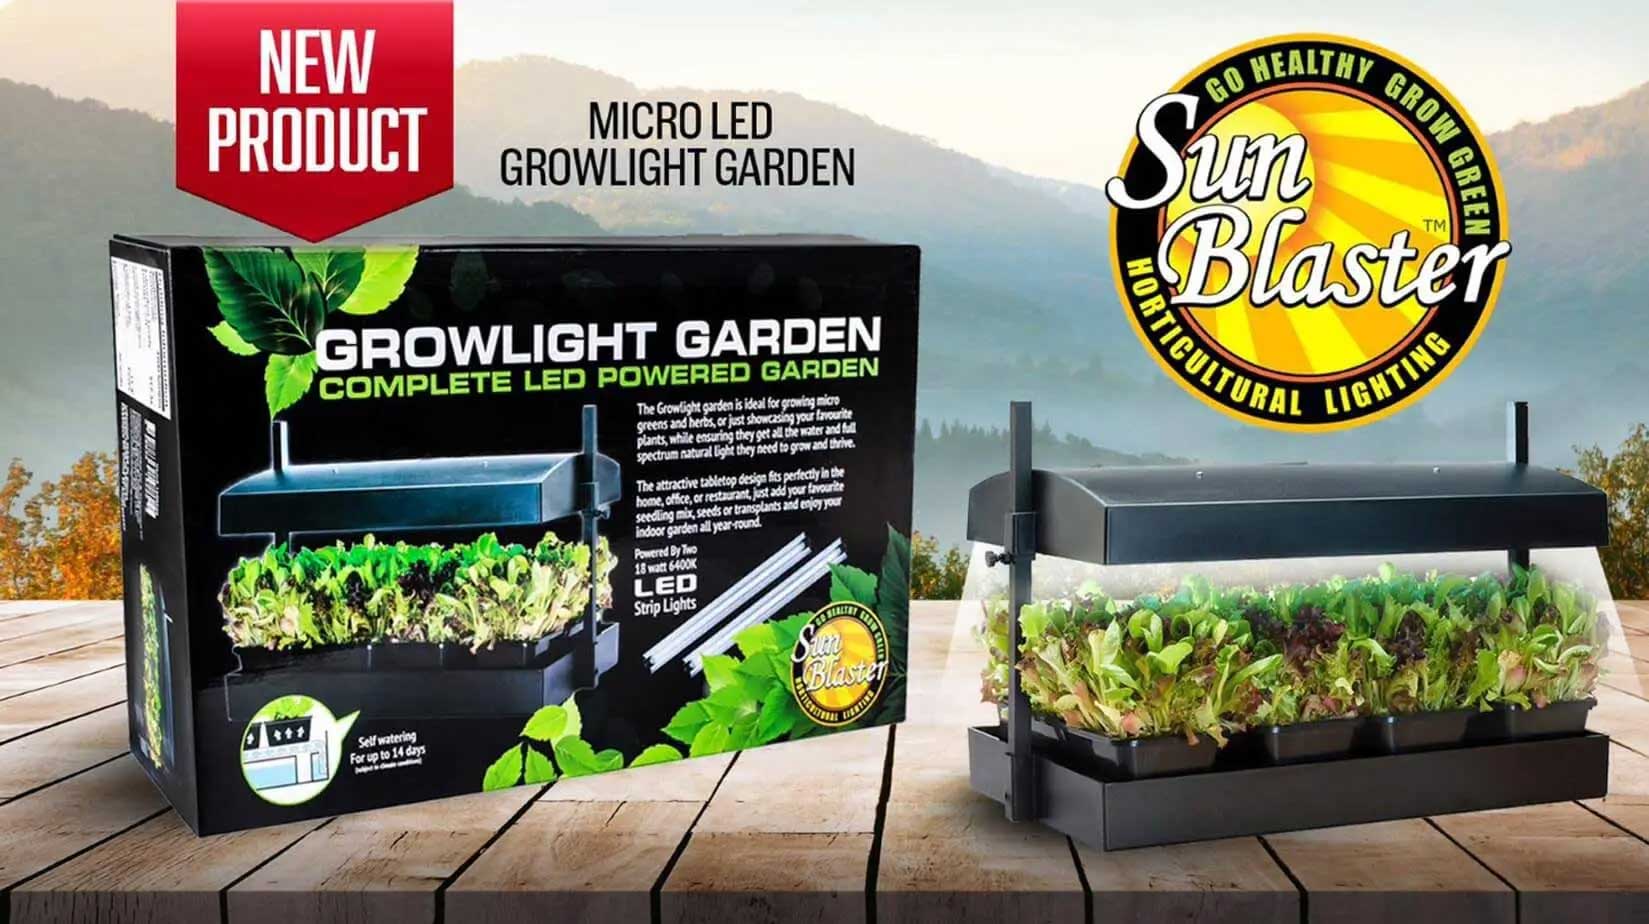 LED Grow Light Garden - available at Homegrown Outlet